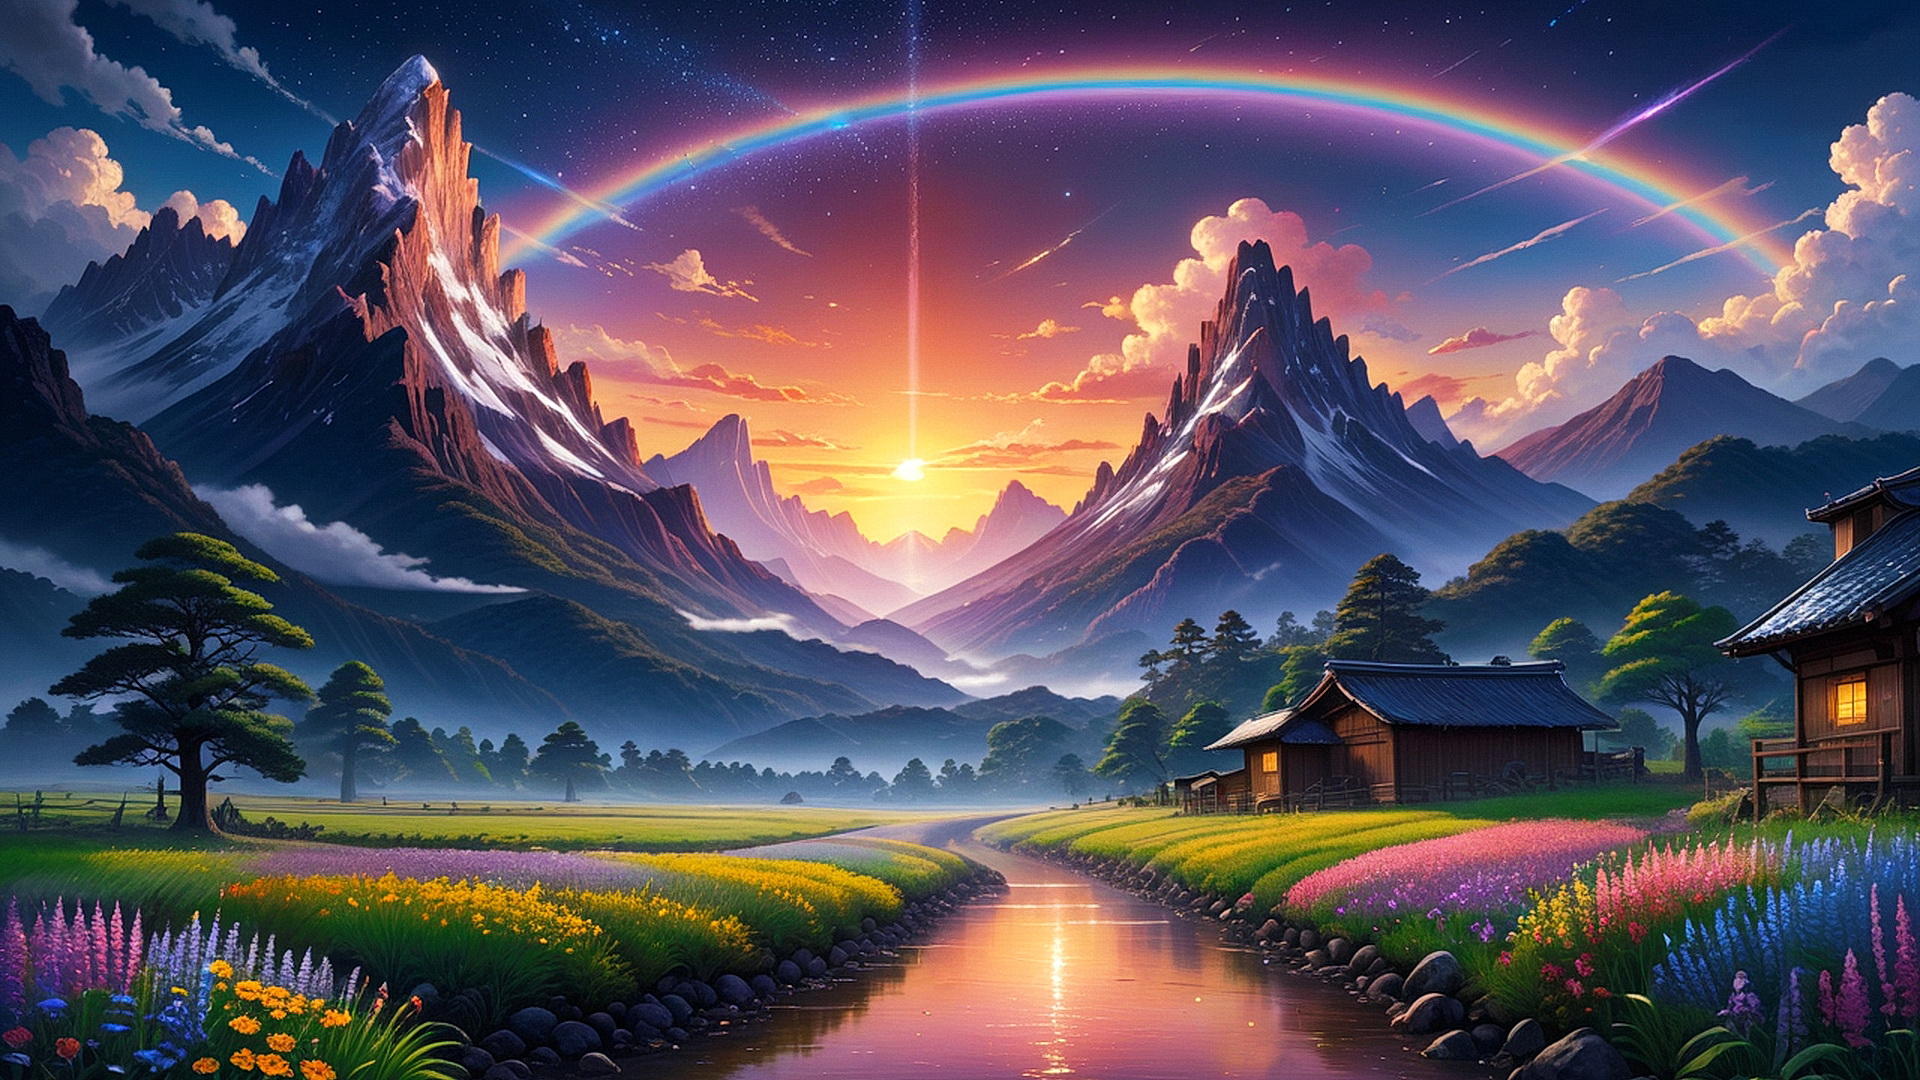 Free photo Mountain landscape with rainbow and wooden houses